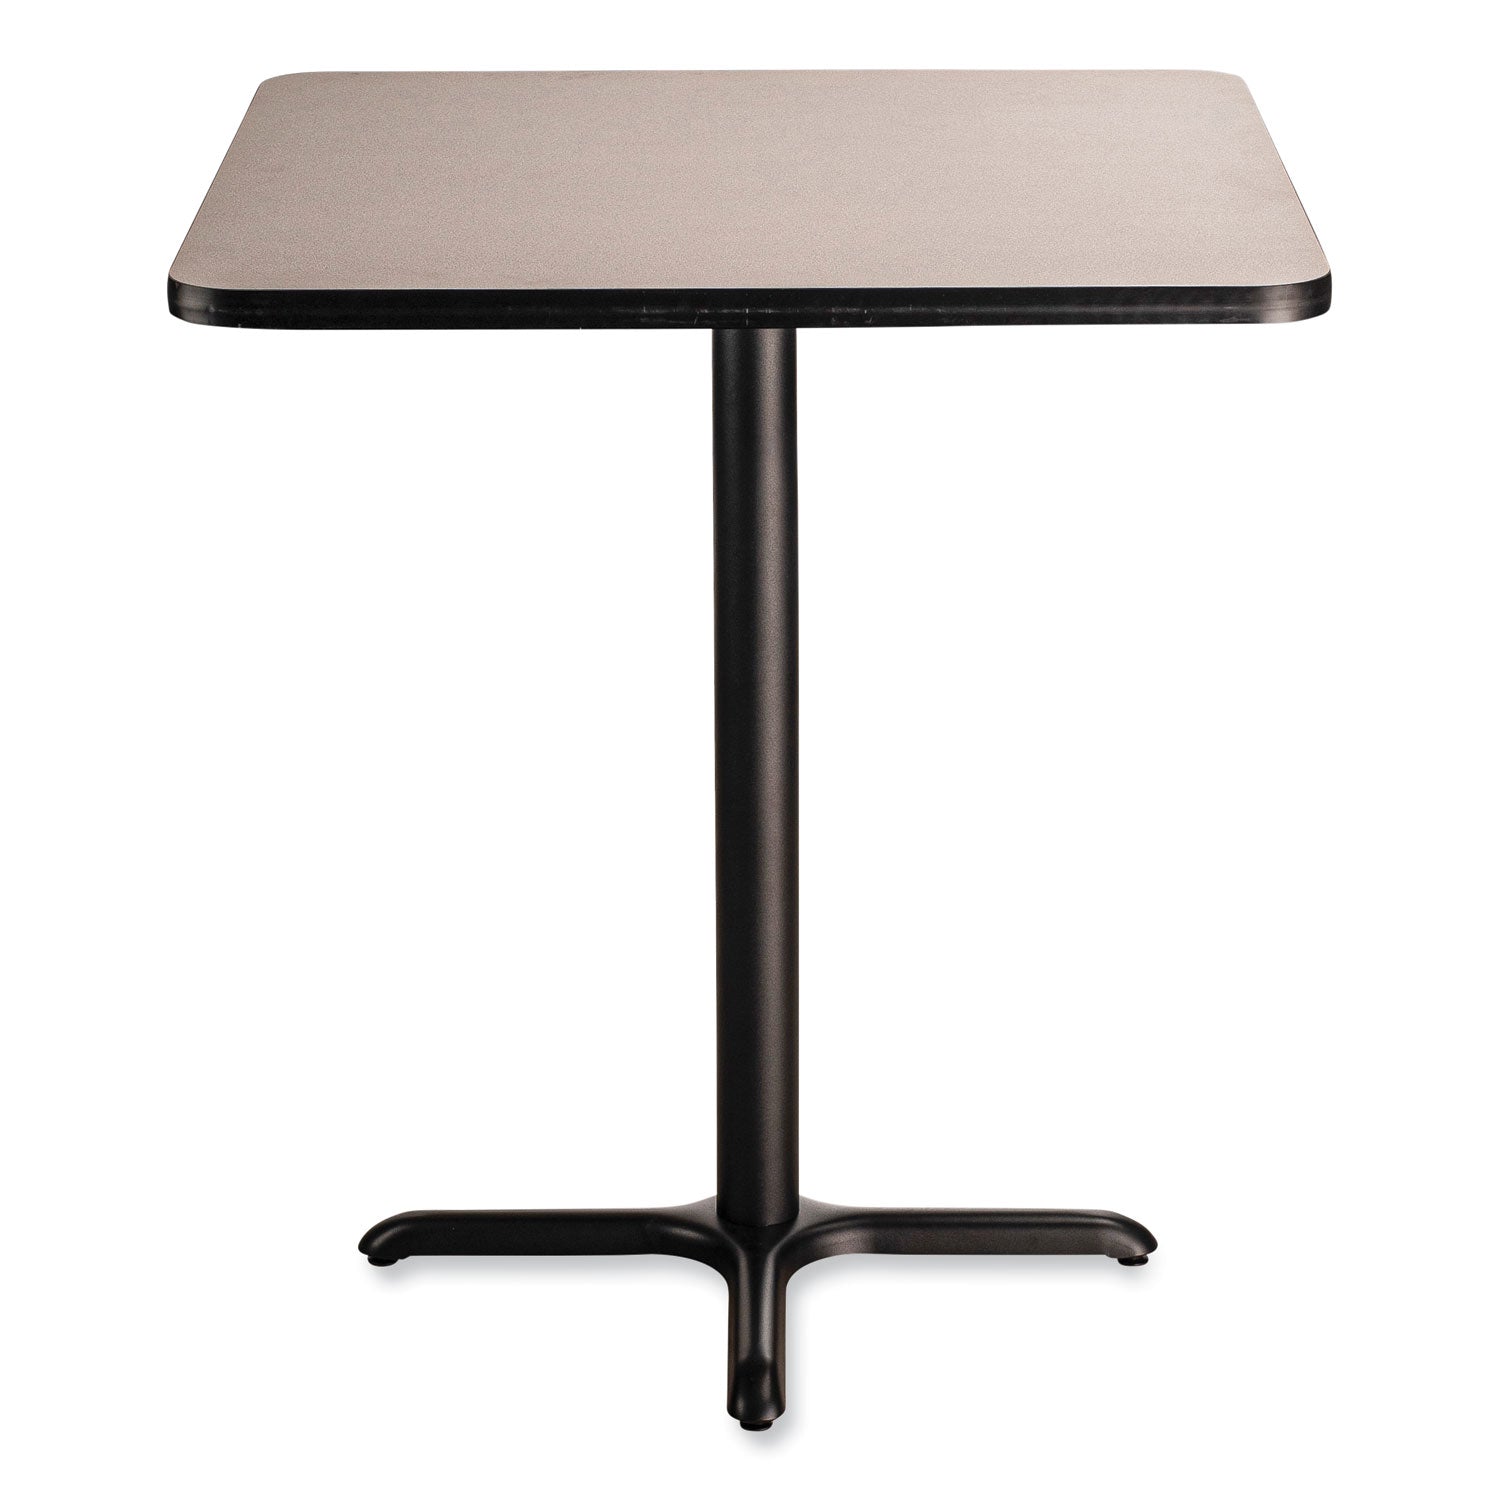 cafe-table-36w-x-36d-x-42h-square-top-x-base-gray-nebula-top-black-base-ships-in-7-10-business-days_npsct33636xb1gy - 2